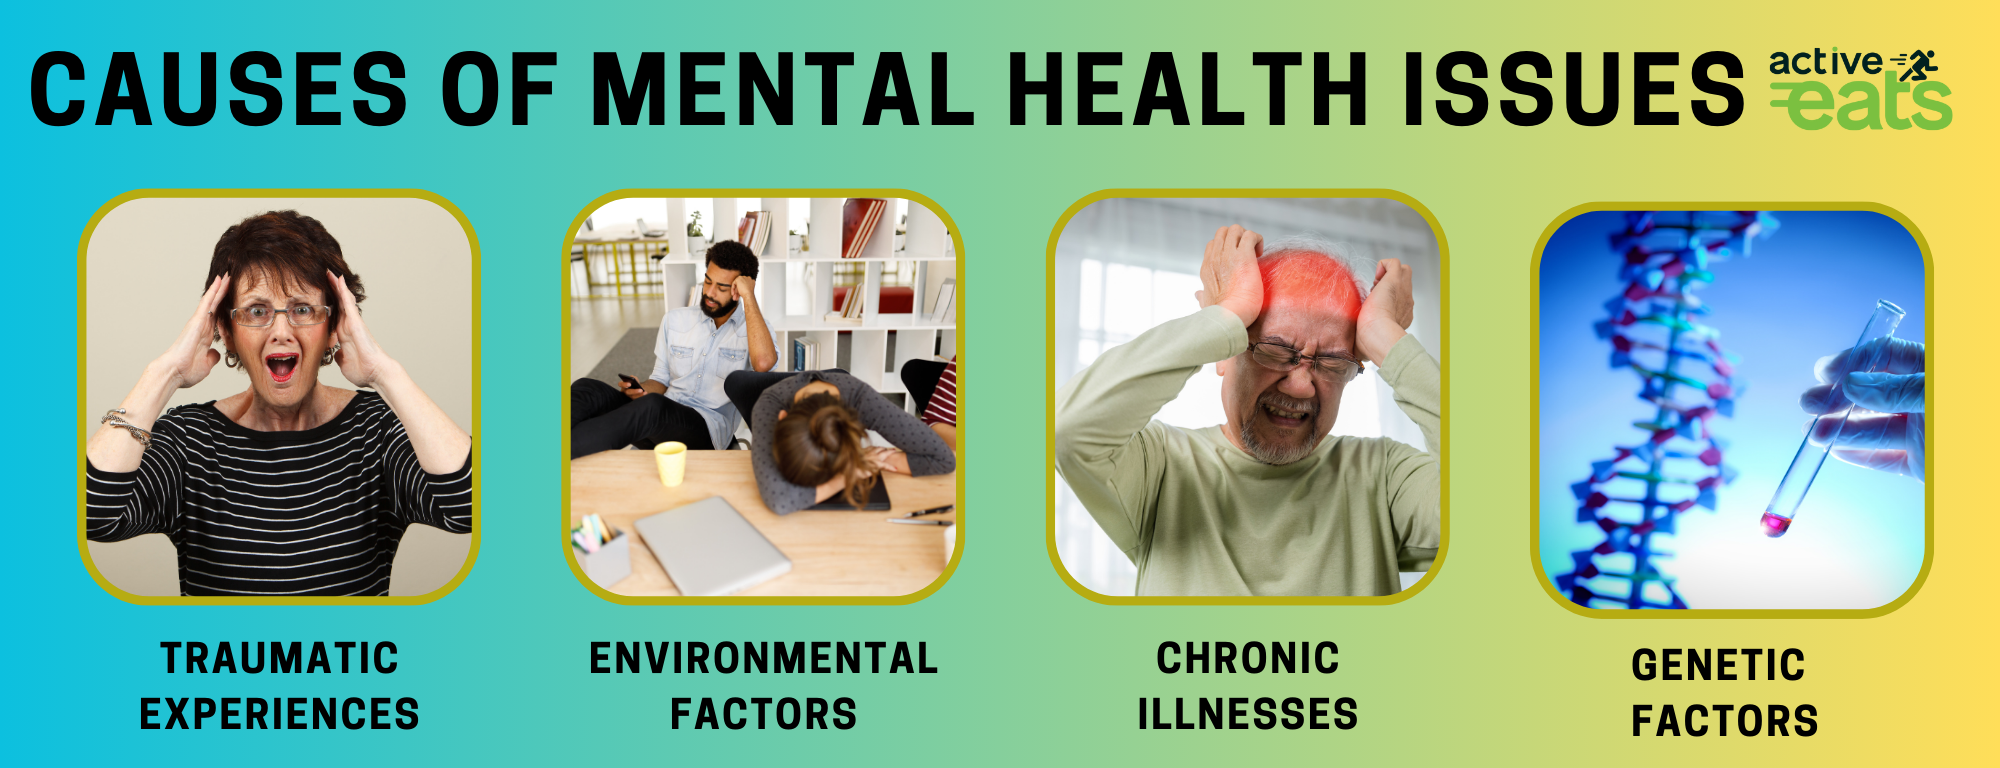 Image showing common mental health problems which are traumatic experiences, environmental factors, chronic illness and genetic factors